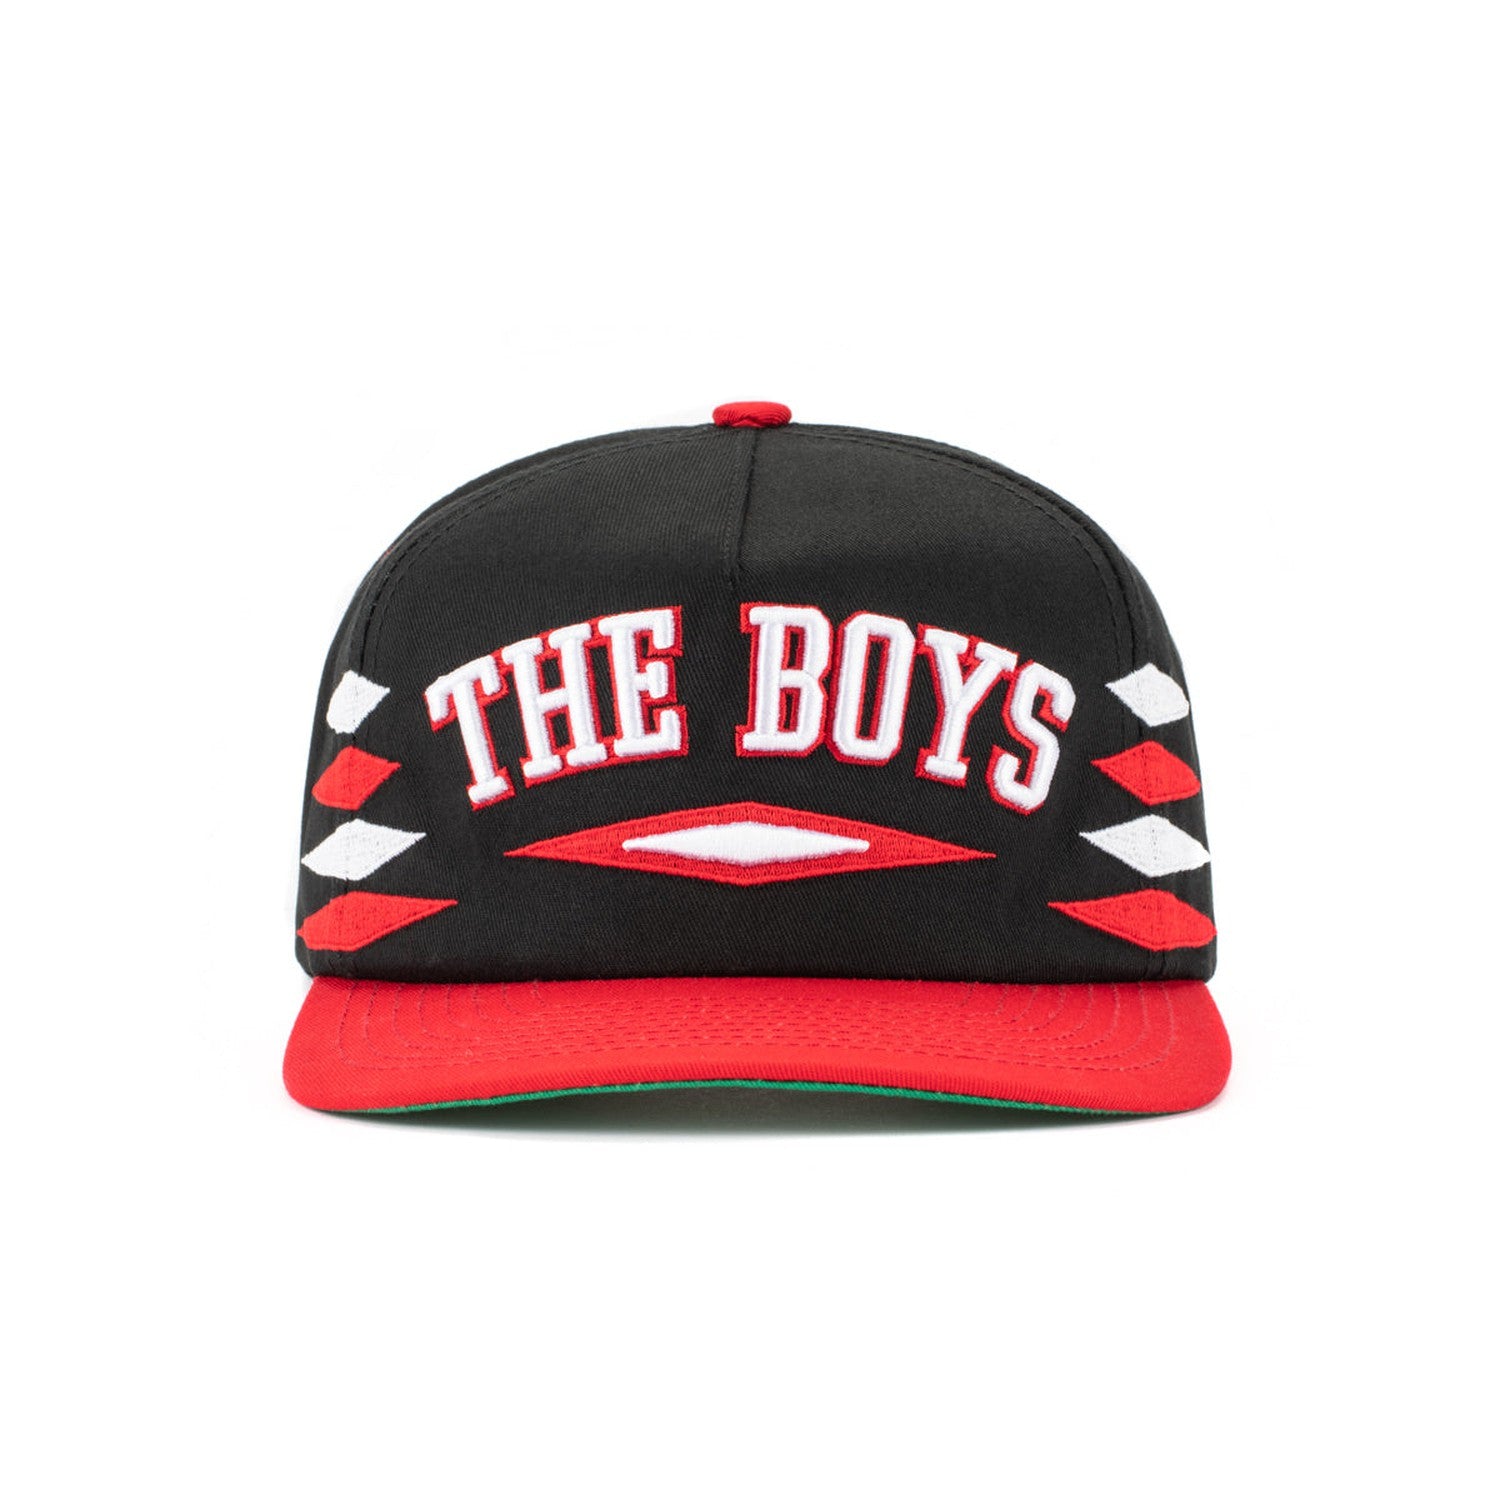 The Boys Diamond Retro Hat | Bussin' with The Boys Black/Red